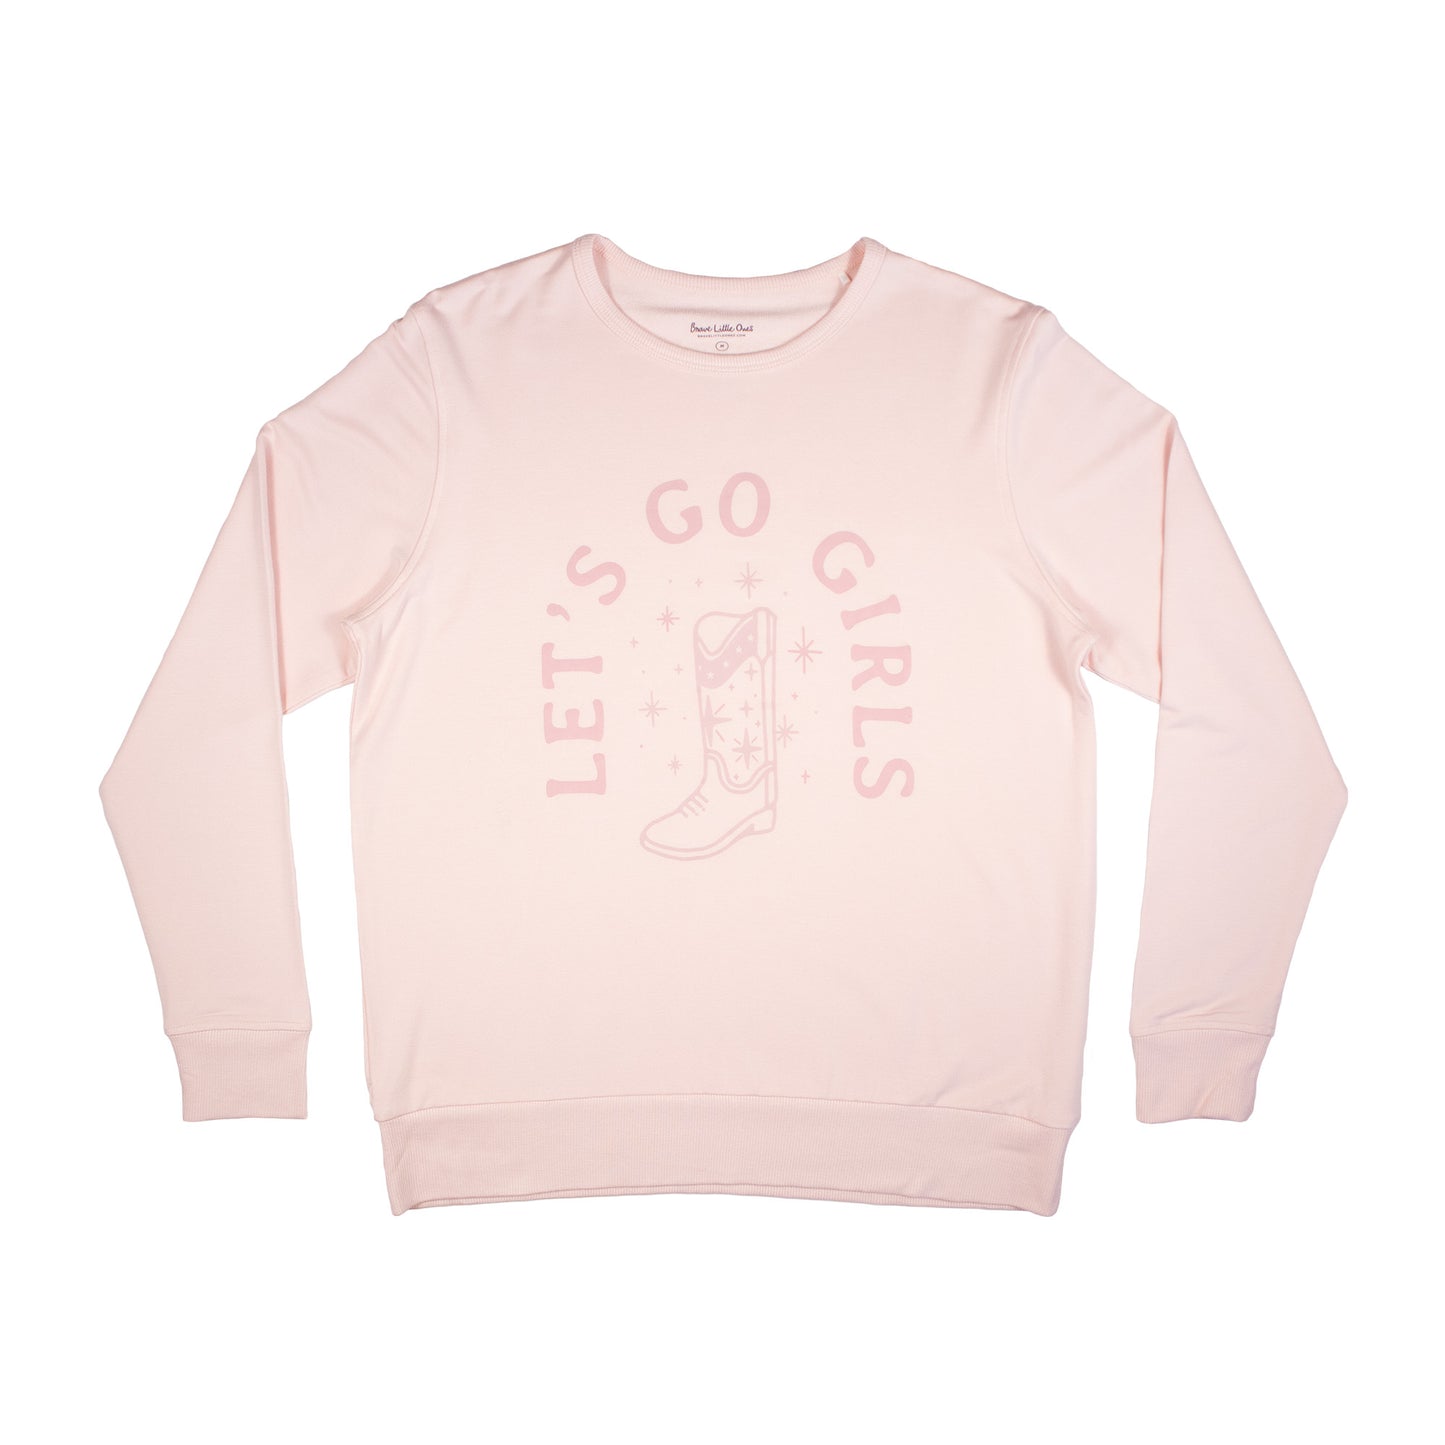 Let's Go Girls Women's French Terry Pullover